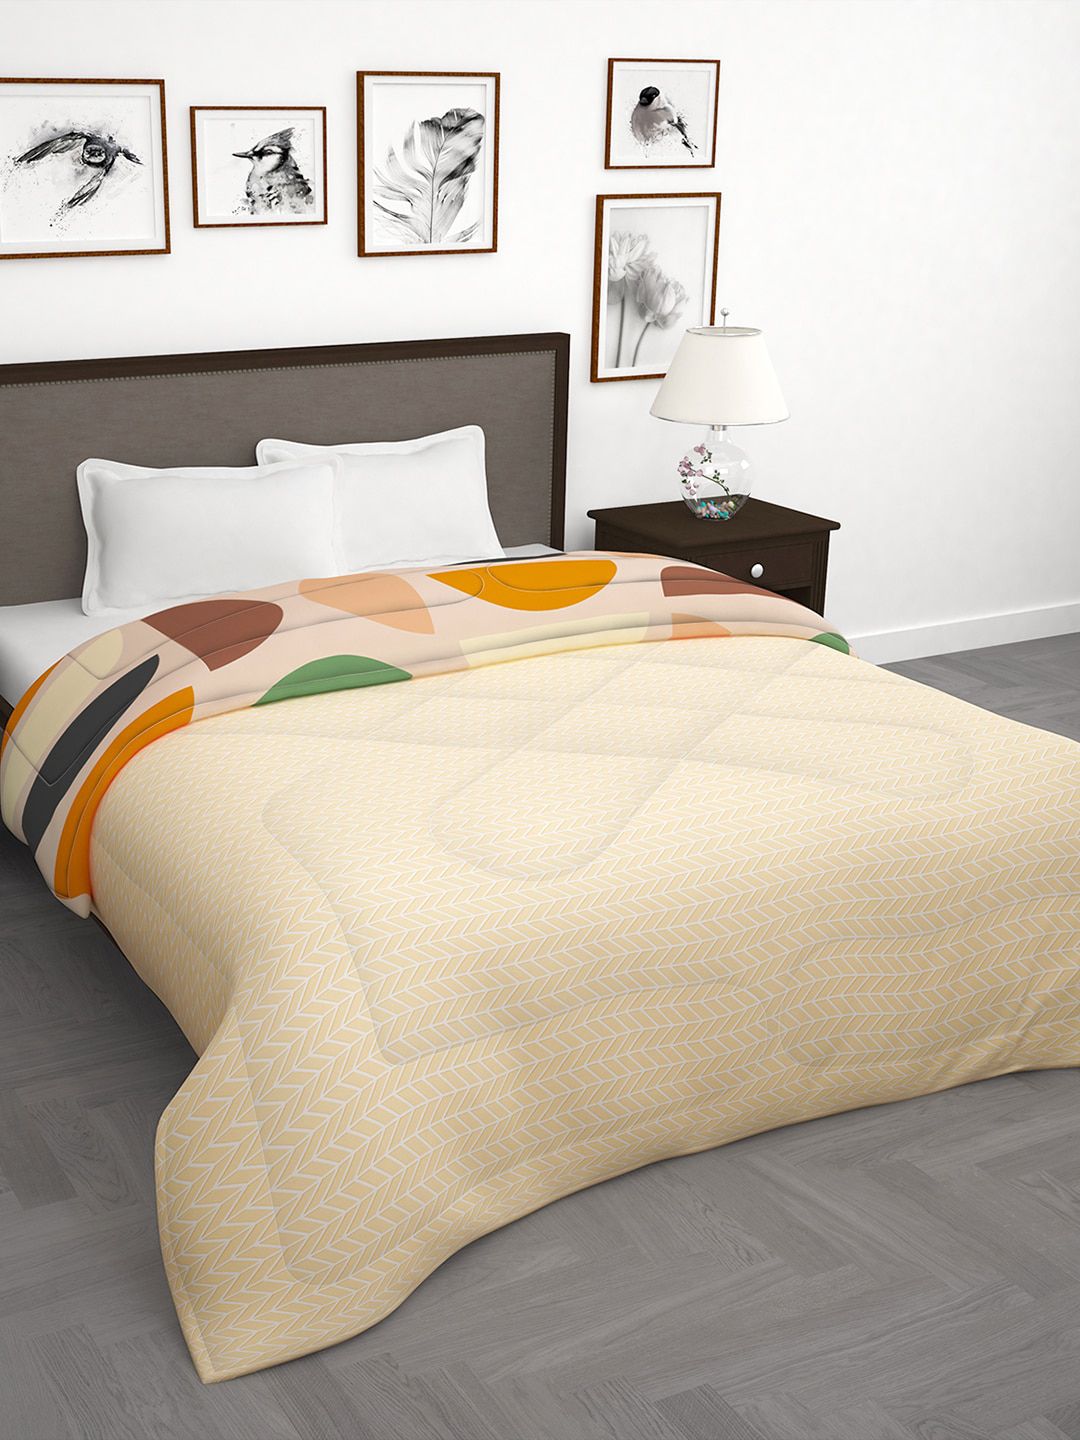 Story@home Peach & Orange Geometric 180 GSM AC Room Reversible Double Bed Comforter Price in India